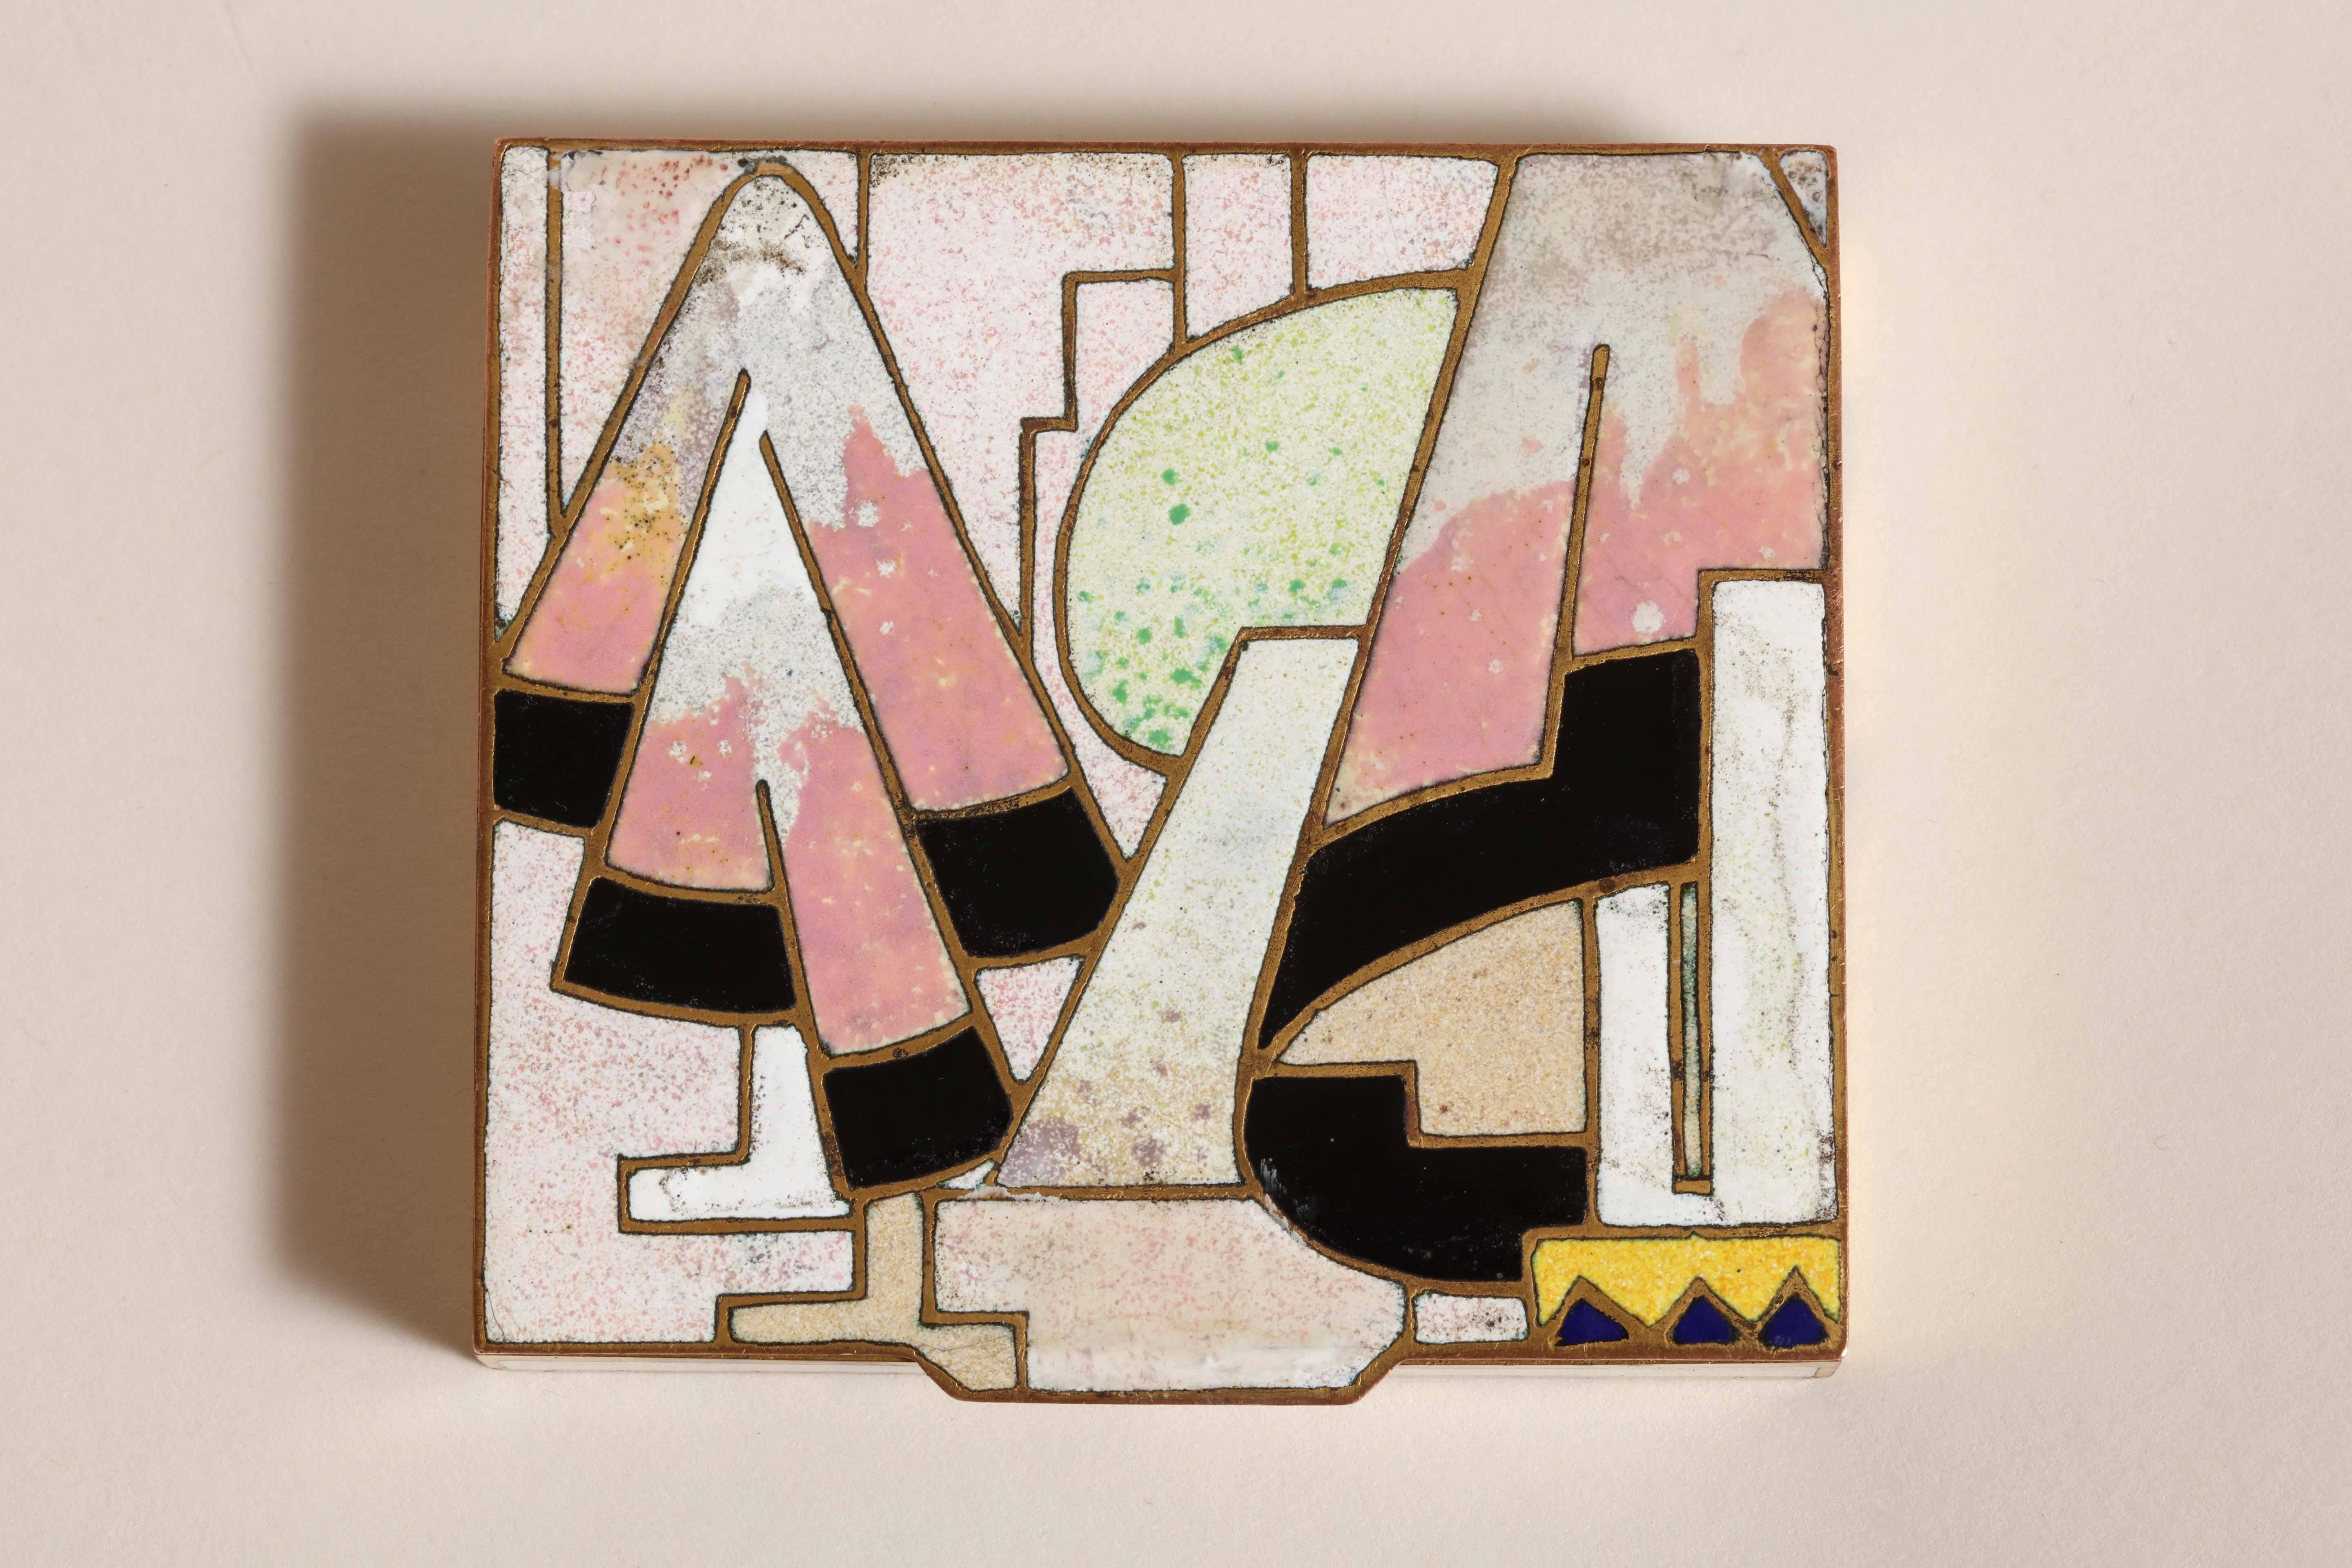 This rectangular box has white, black, pink, yellow and light green champlevé enamel design on top and white enamel on the sides. 
Inscribed: Jean Goulden XXXIII 1926 underneat. 

Literature:
Bernard Goulden, 